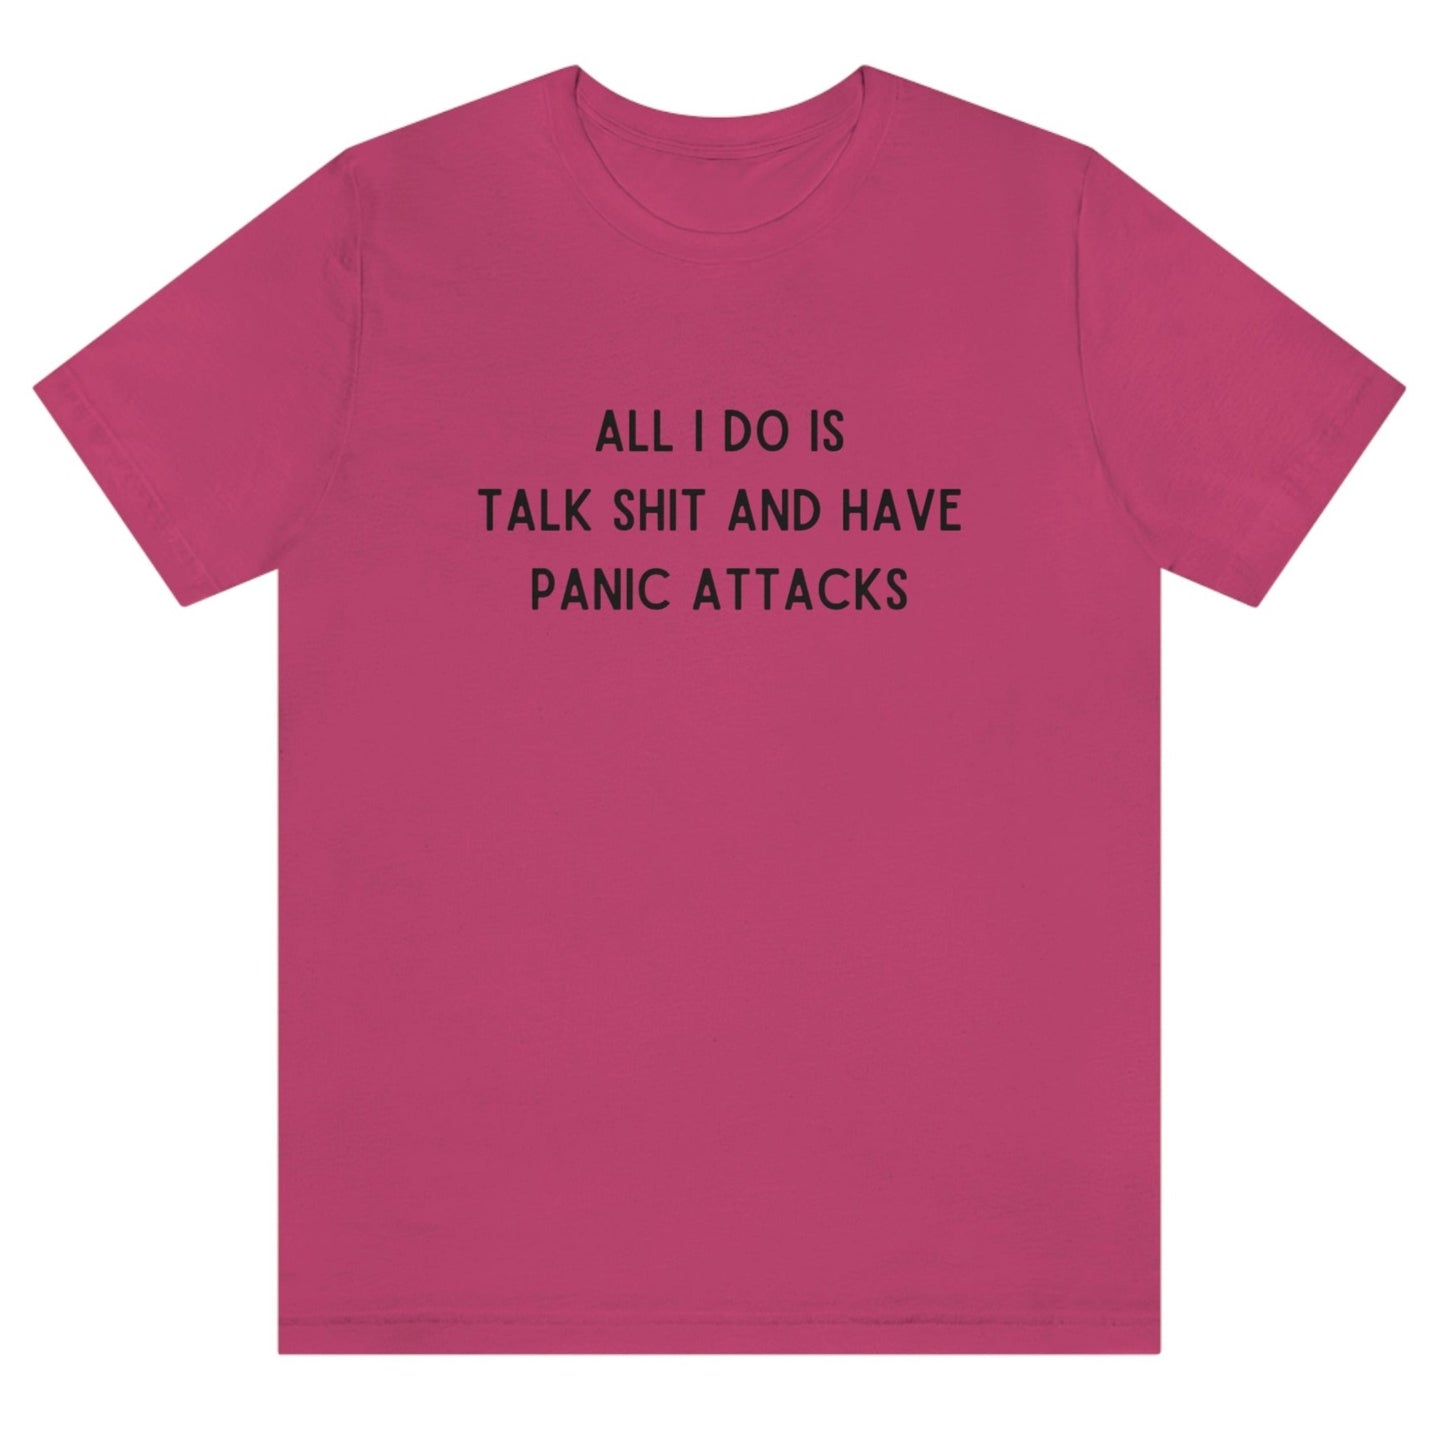 all-i-do-is-talk-shit-and-have-panic-attacks-berry-t-shirt-funny-unisex